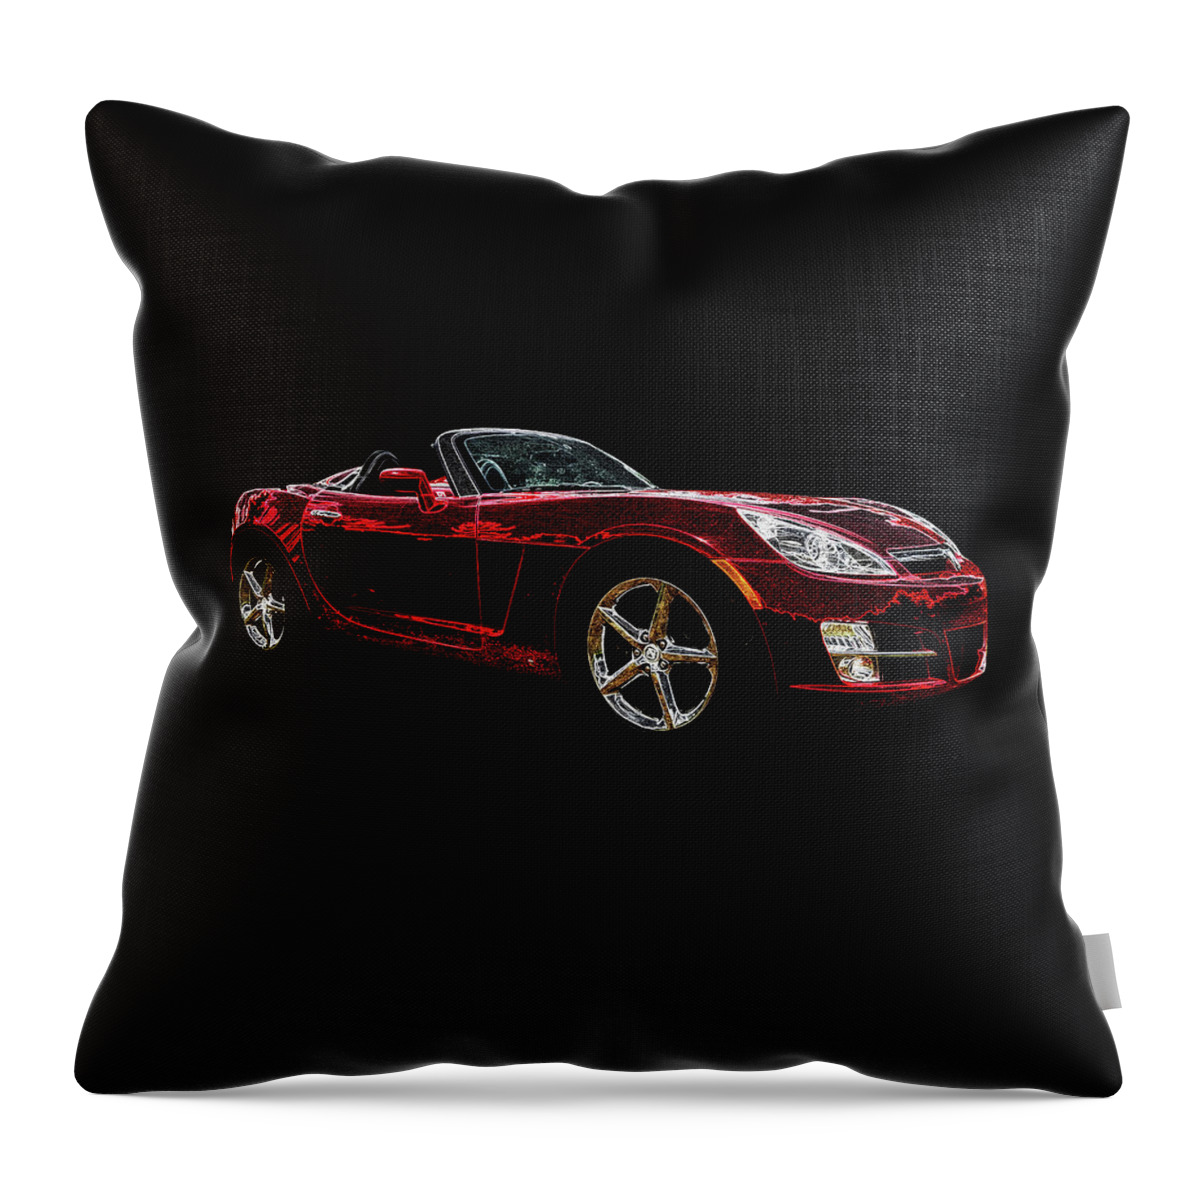 Saturn Throw Pillow featuring the photograph Neon Chili Pepper Red Saturn Sky by Diane Lindon Coy